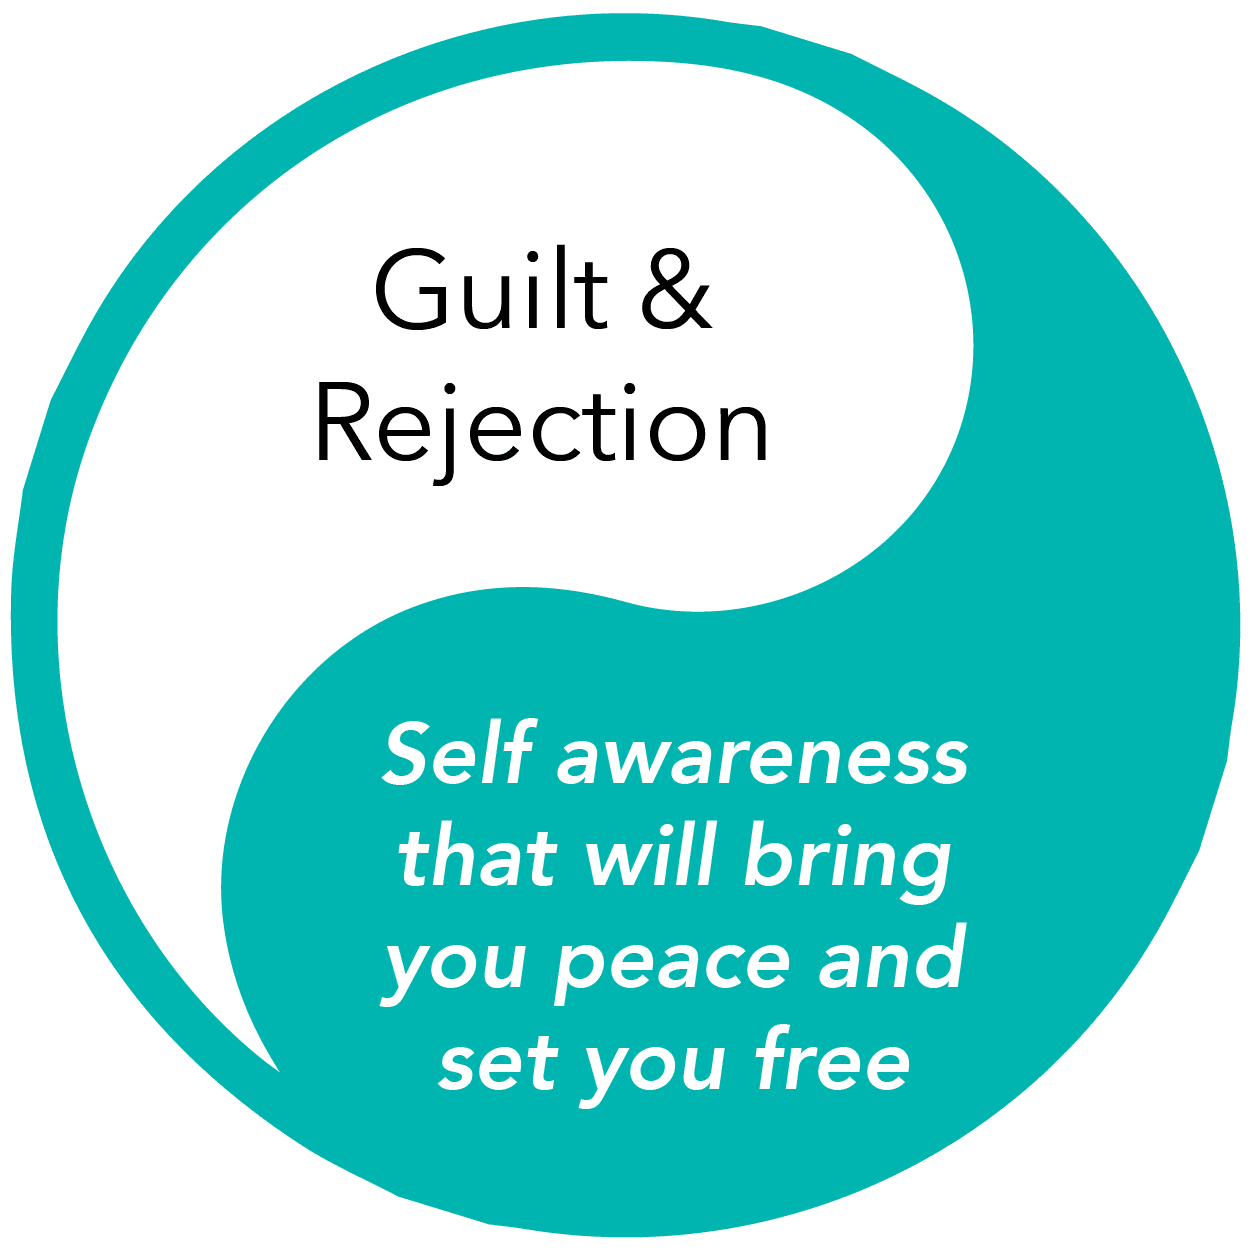 Guilt & Rejection: Peace to set you free